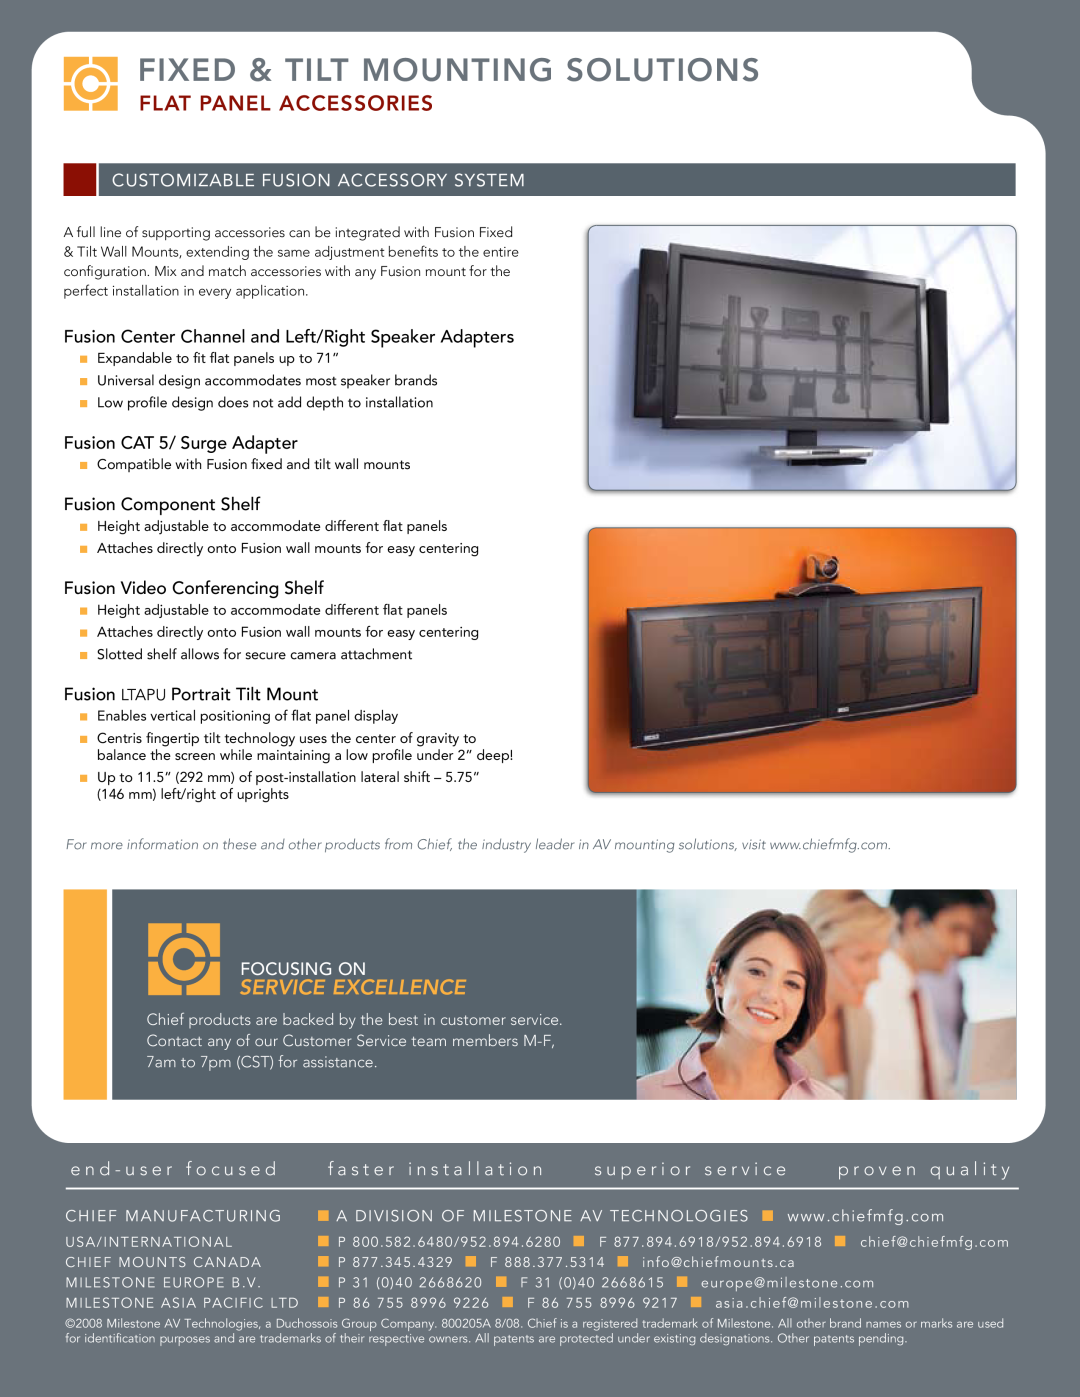 Chief Manufacturing Fusion Series manual Flat Panel Accessories, Customizable Fusion Accessory System, Focusing On 